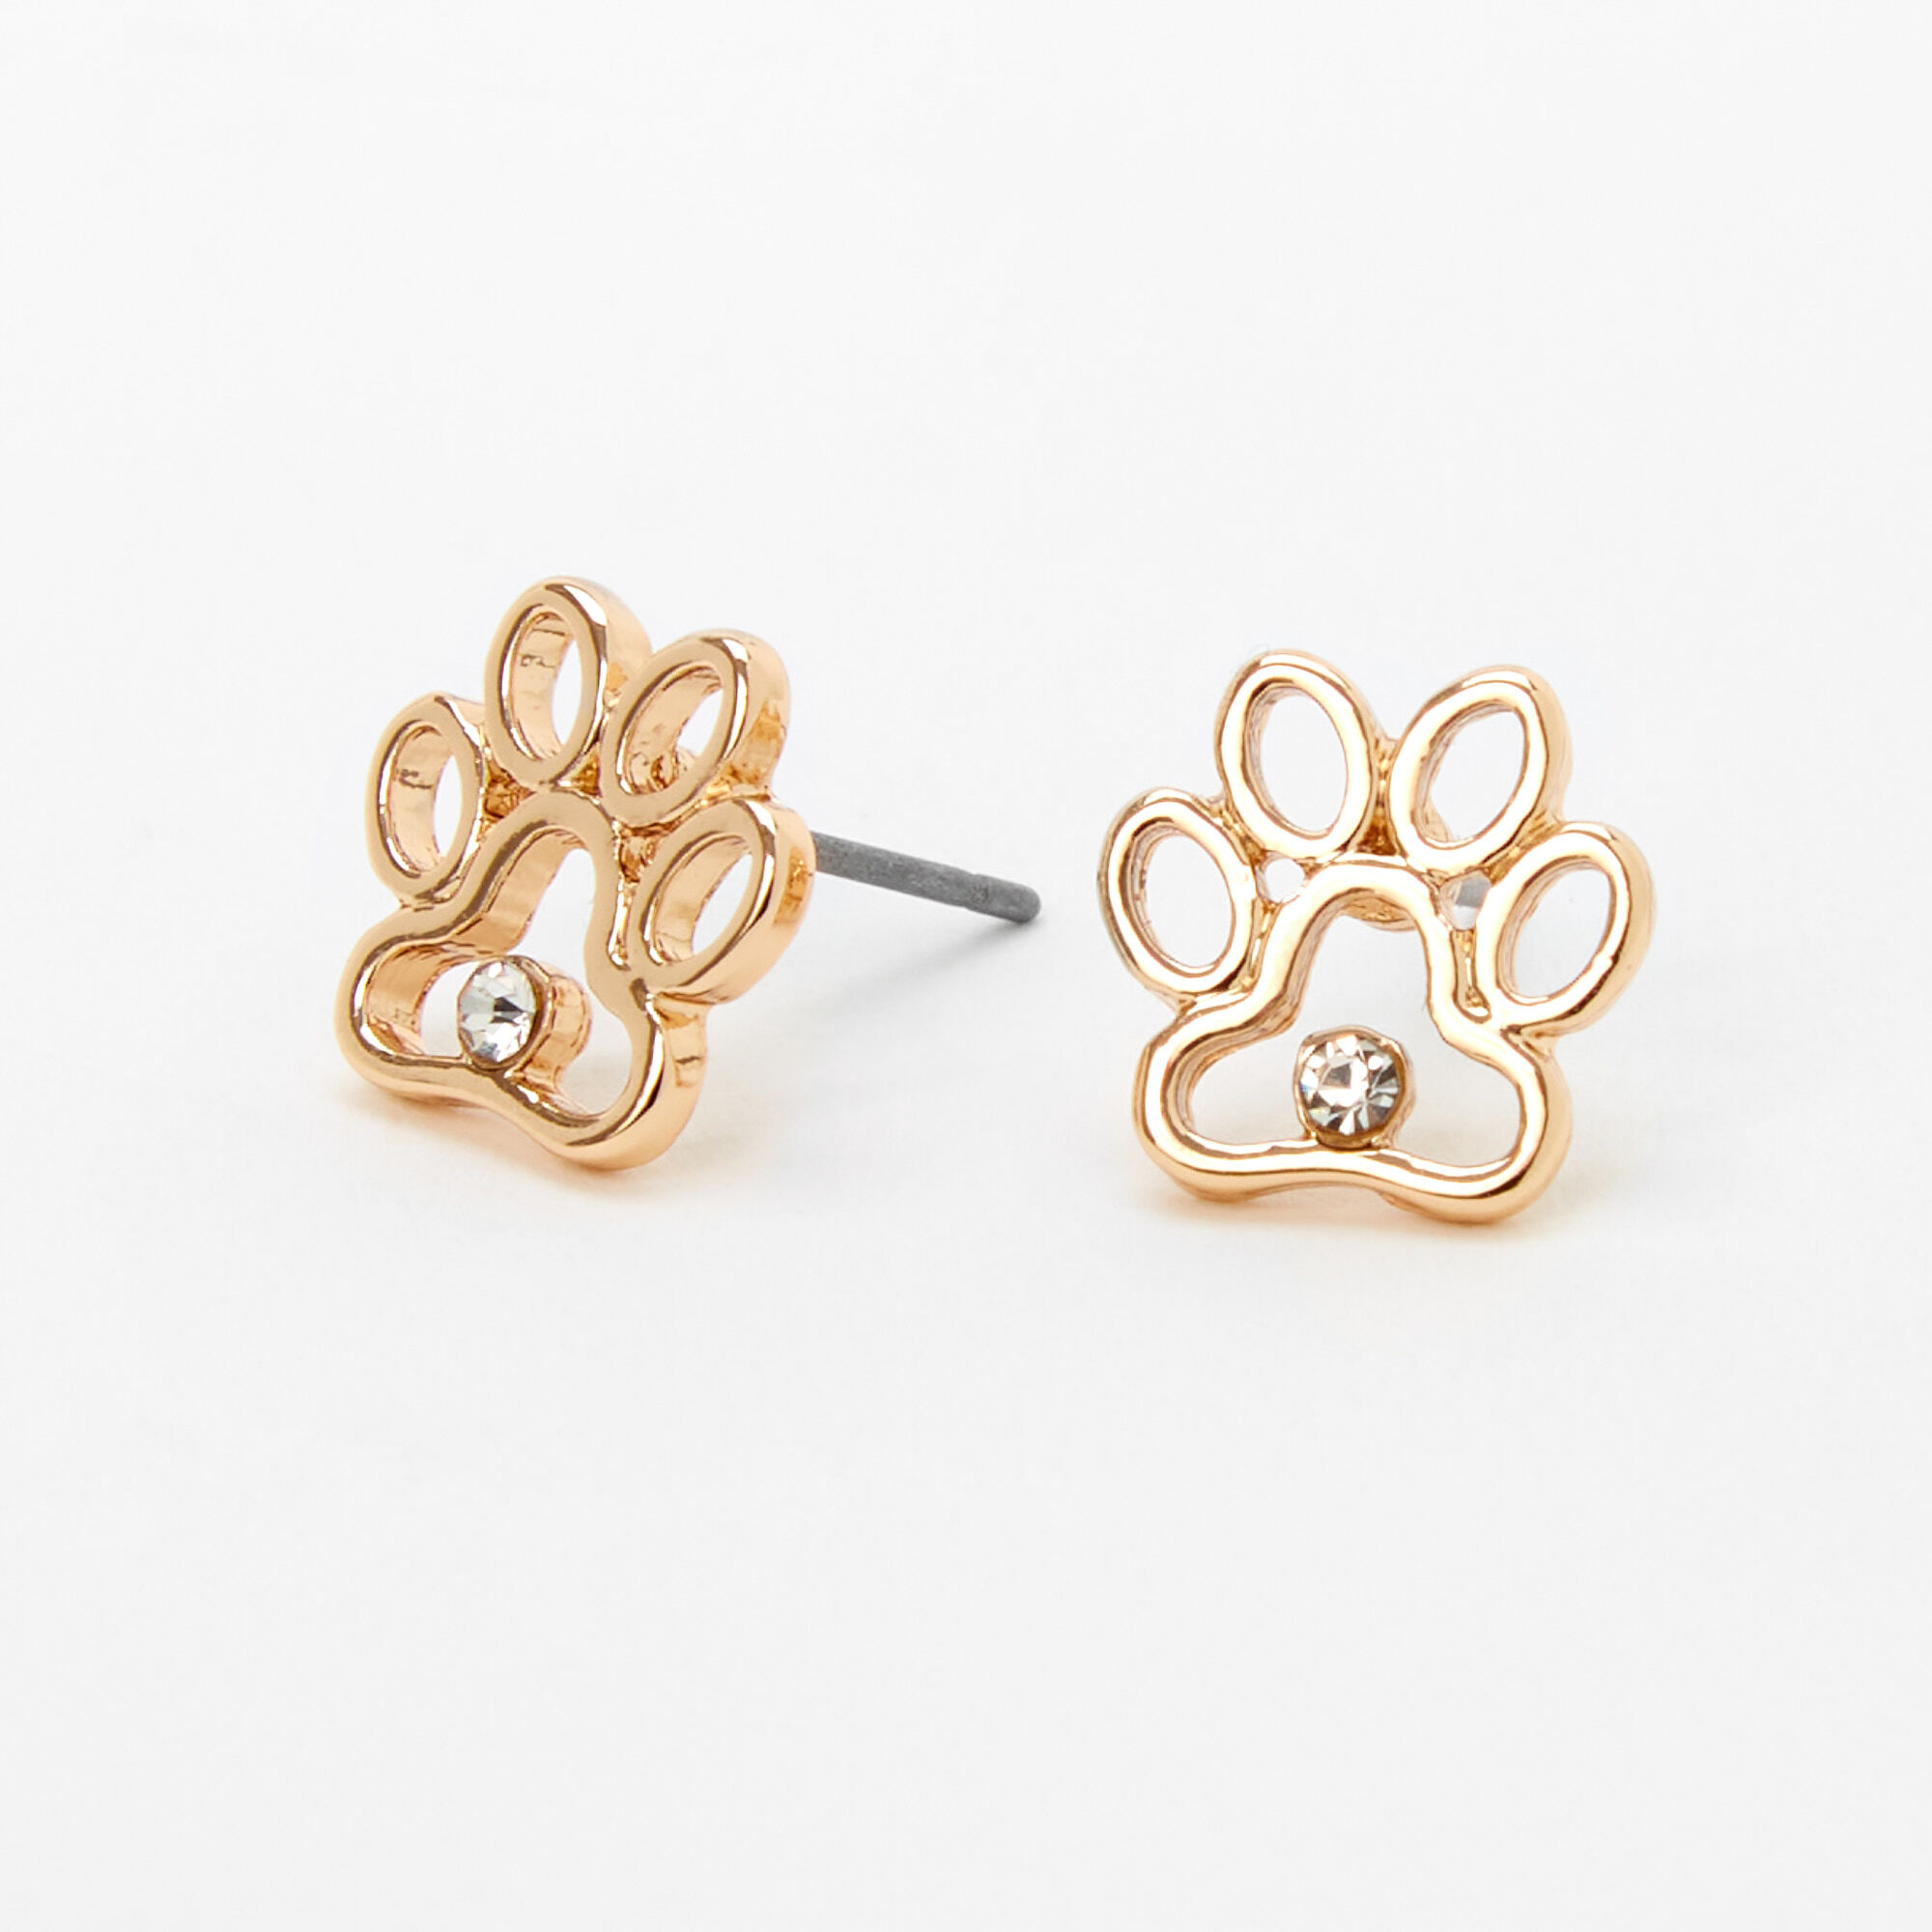 View Claires Tone Crystal Paw Print Stud Earrings Gold information